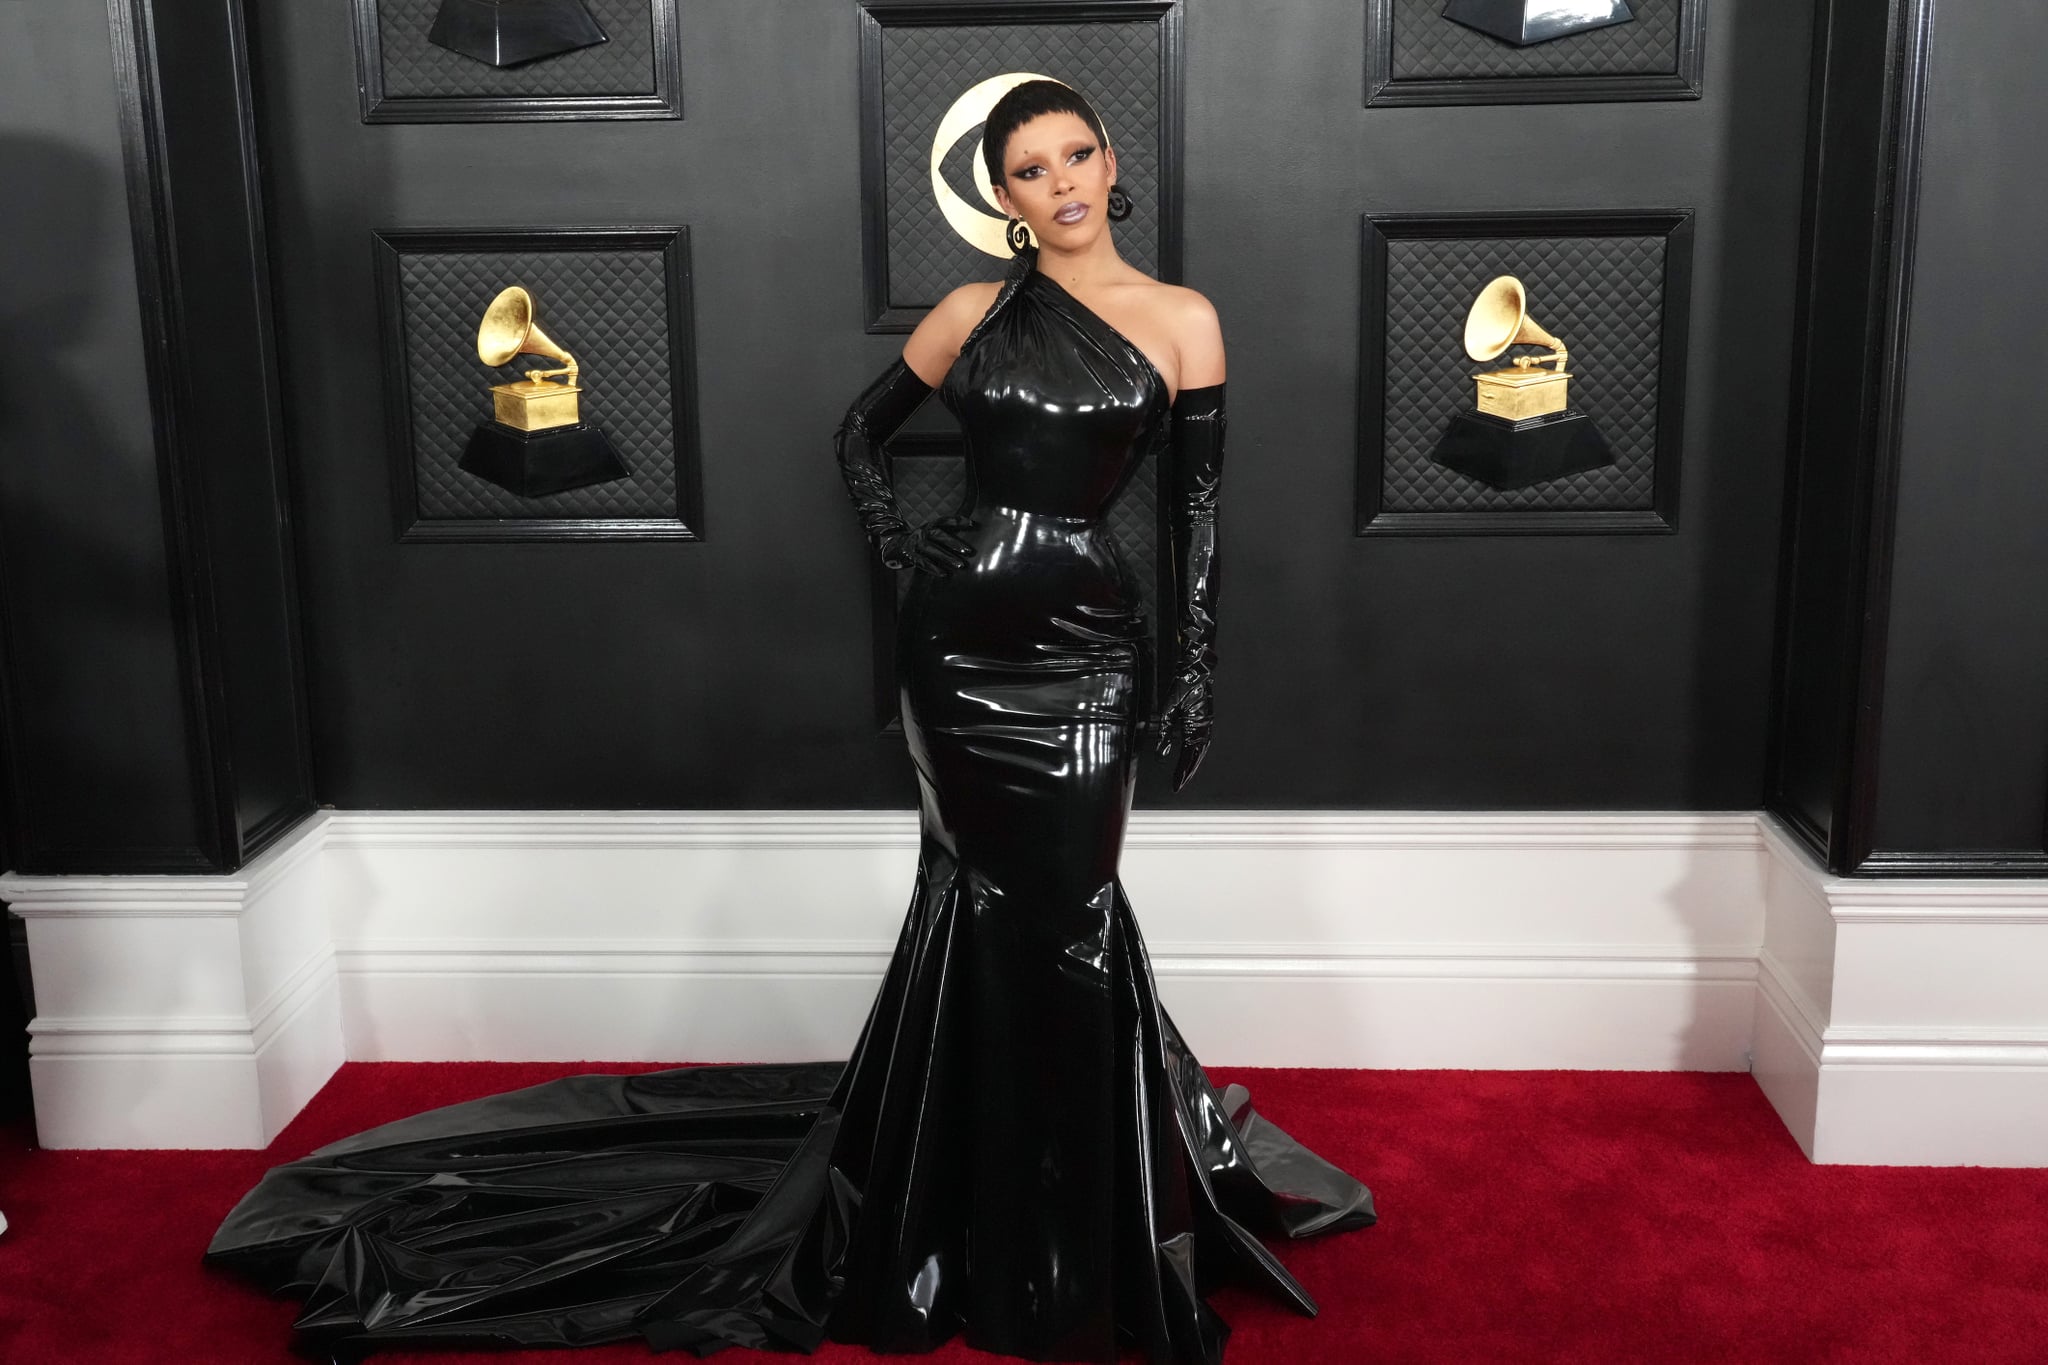 LOS ANGELES, CALIFORNIA - FEBRUARY 05: (FOR EDITORIAL USE ONLY) Doja Cat attends the 65th GRAMMY Awards on February 05, 2023 in Los Angeles, California. (Photo by Jeff Kravitz/FilmMagic)